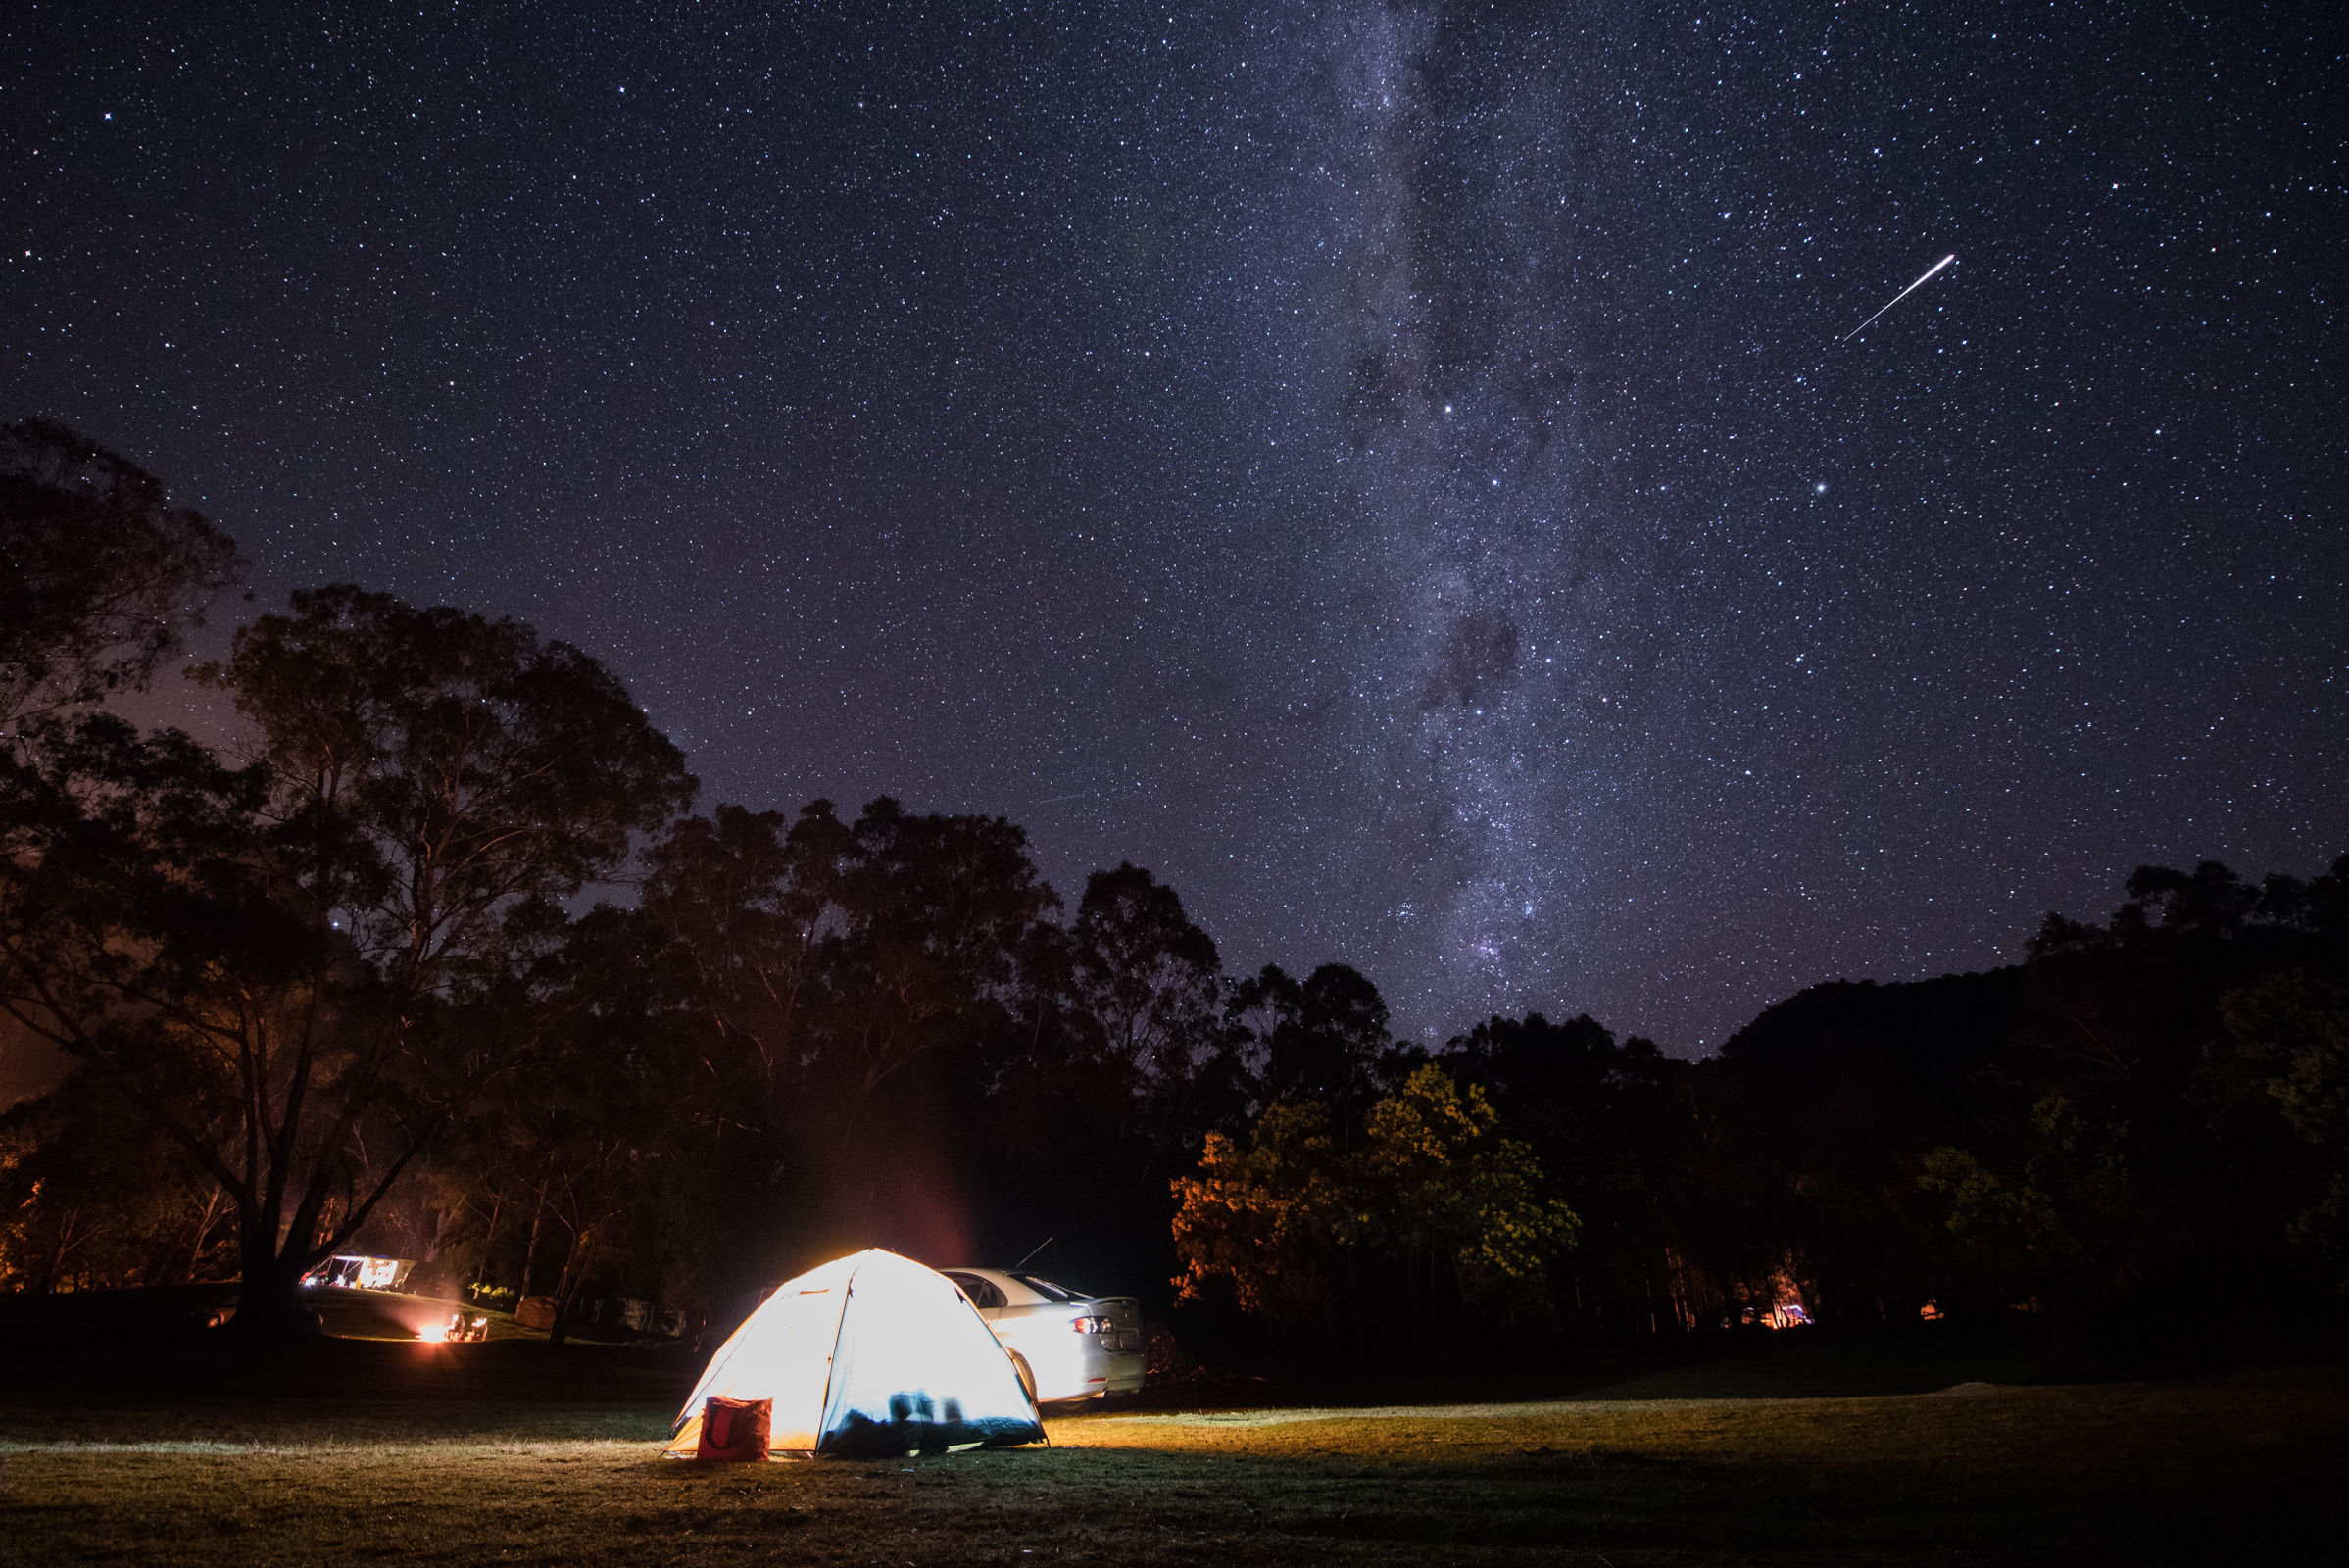 Campground at night under the stars in a NSW national park. Photo: Adrian Mascenon